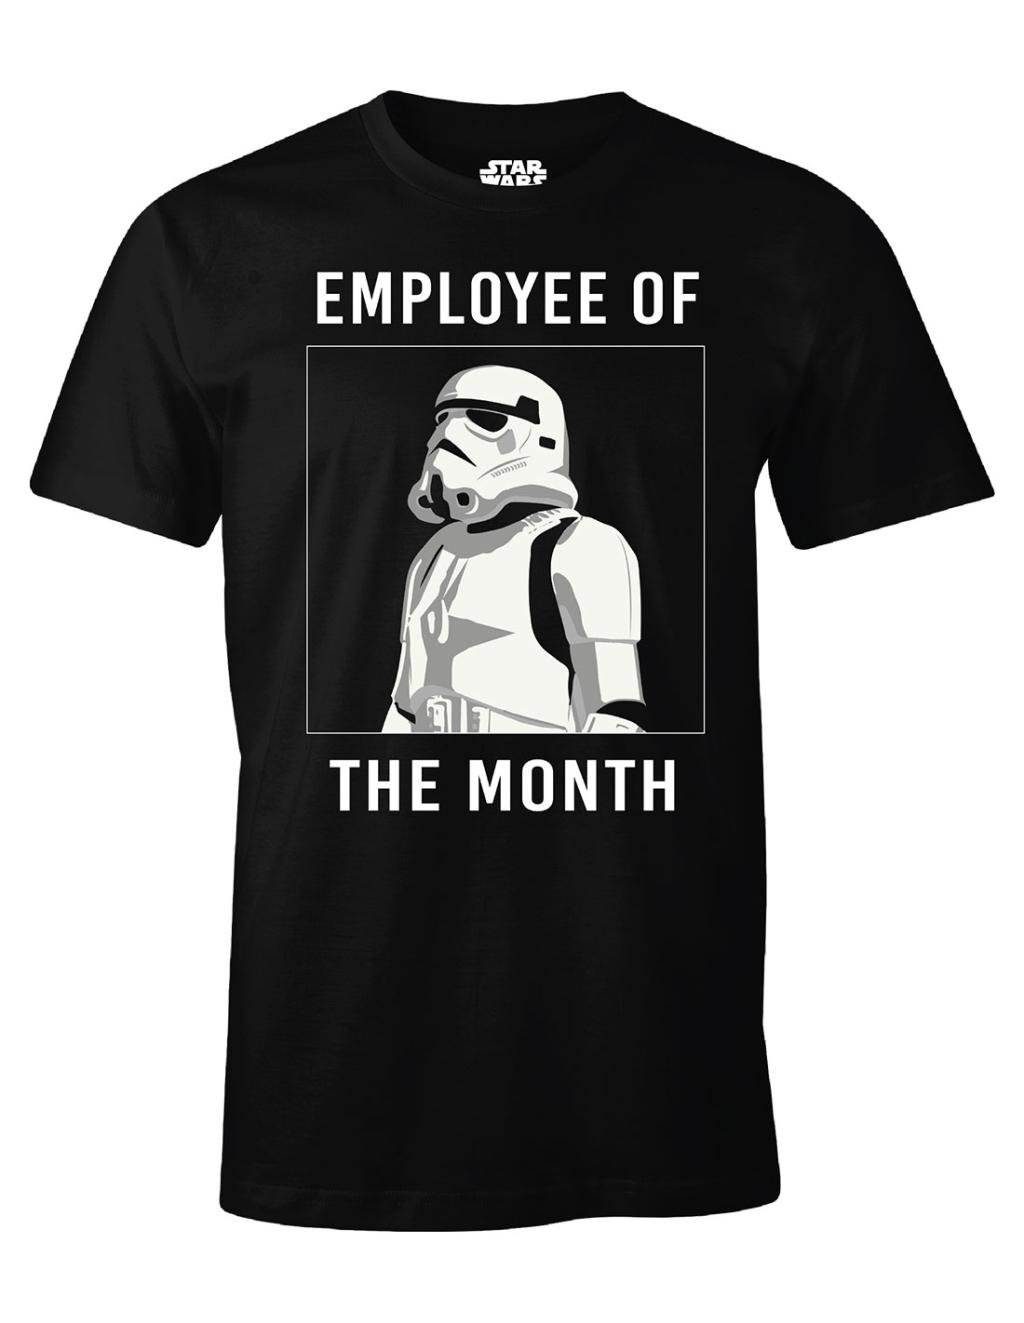 STAR WARS - Employee of the month - T-Shirt (L)